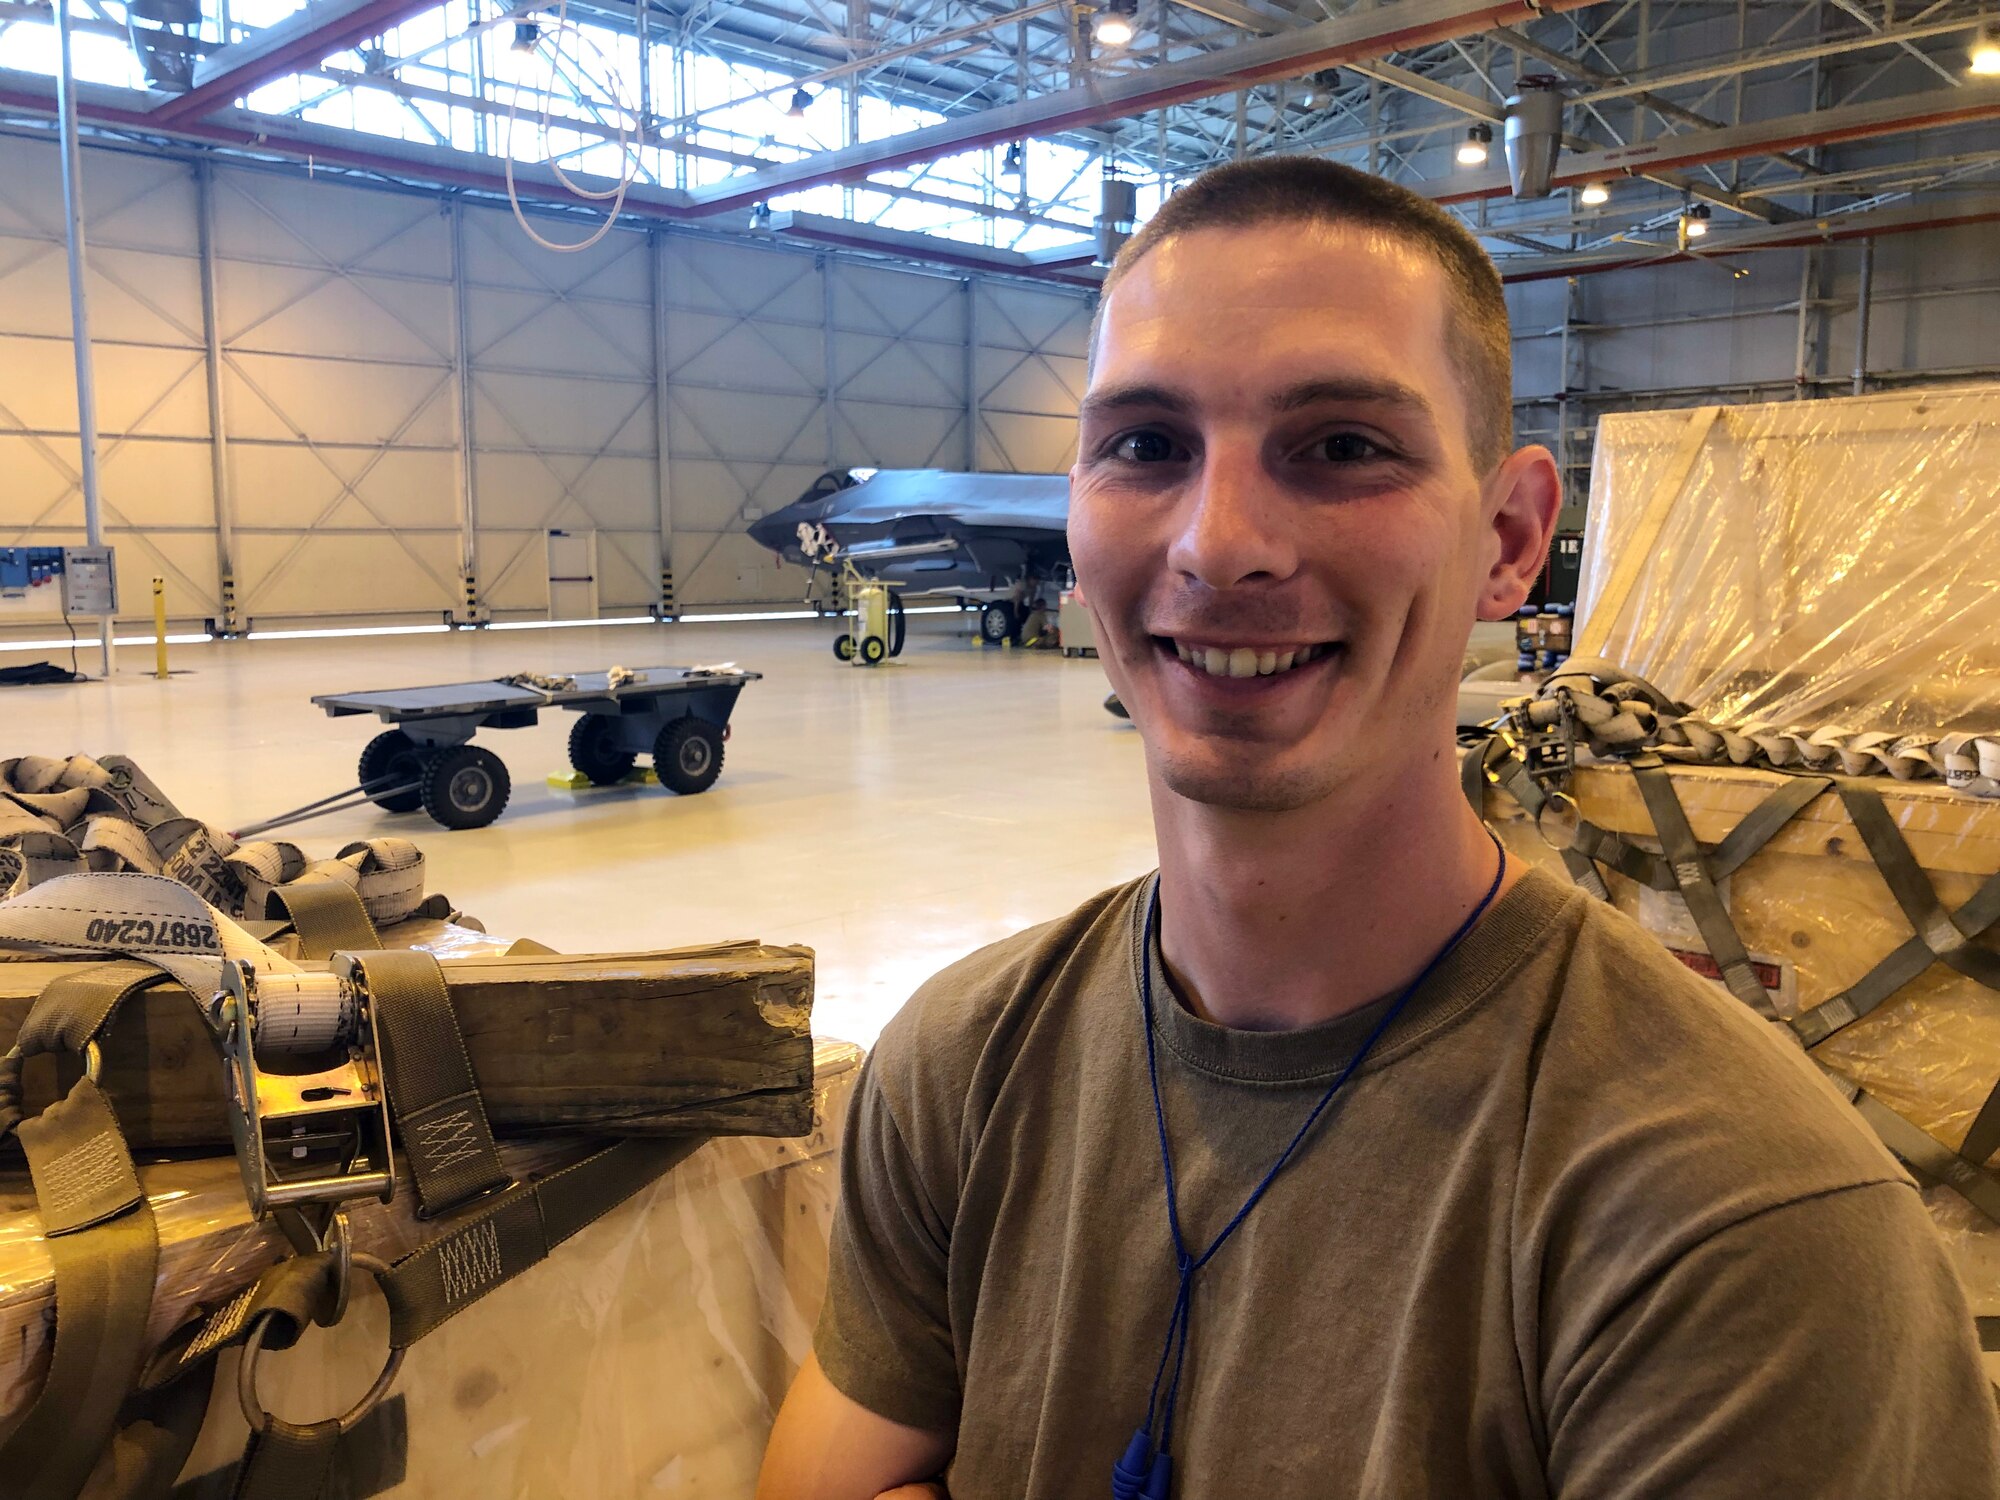 Tech. Sgt. Jesse Mitchell is the first F-35A maintainer in the 388th Fighter Wing to be certified in six different areas of F-35A maintenance. He's part of the Blended Operational Lightning Technician program and currently deployed to Aviano Air Base, Italy with the 421st Fighter Squadron supporting the F-35A in the multi-national defense exercise, Astral Knight 2019.